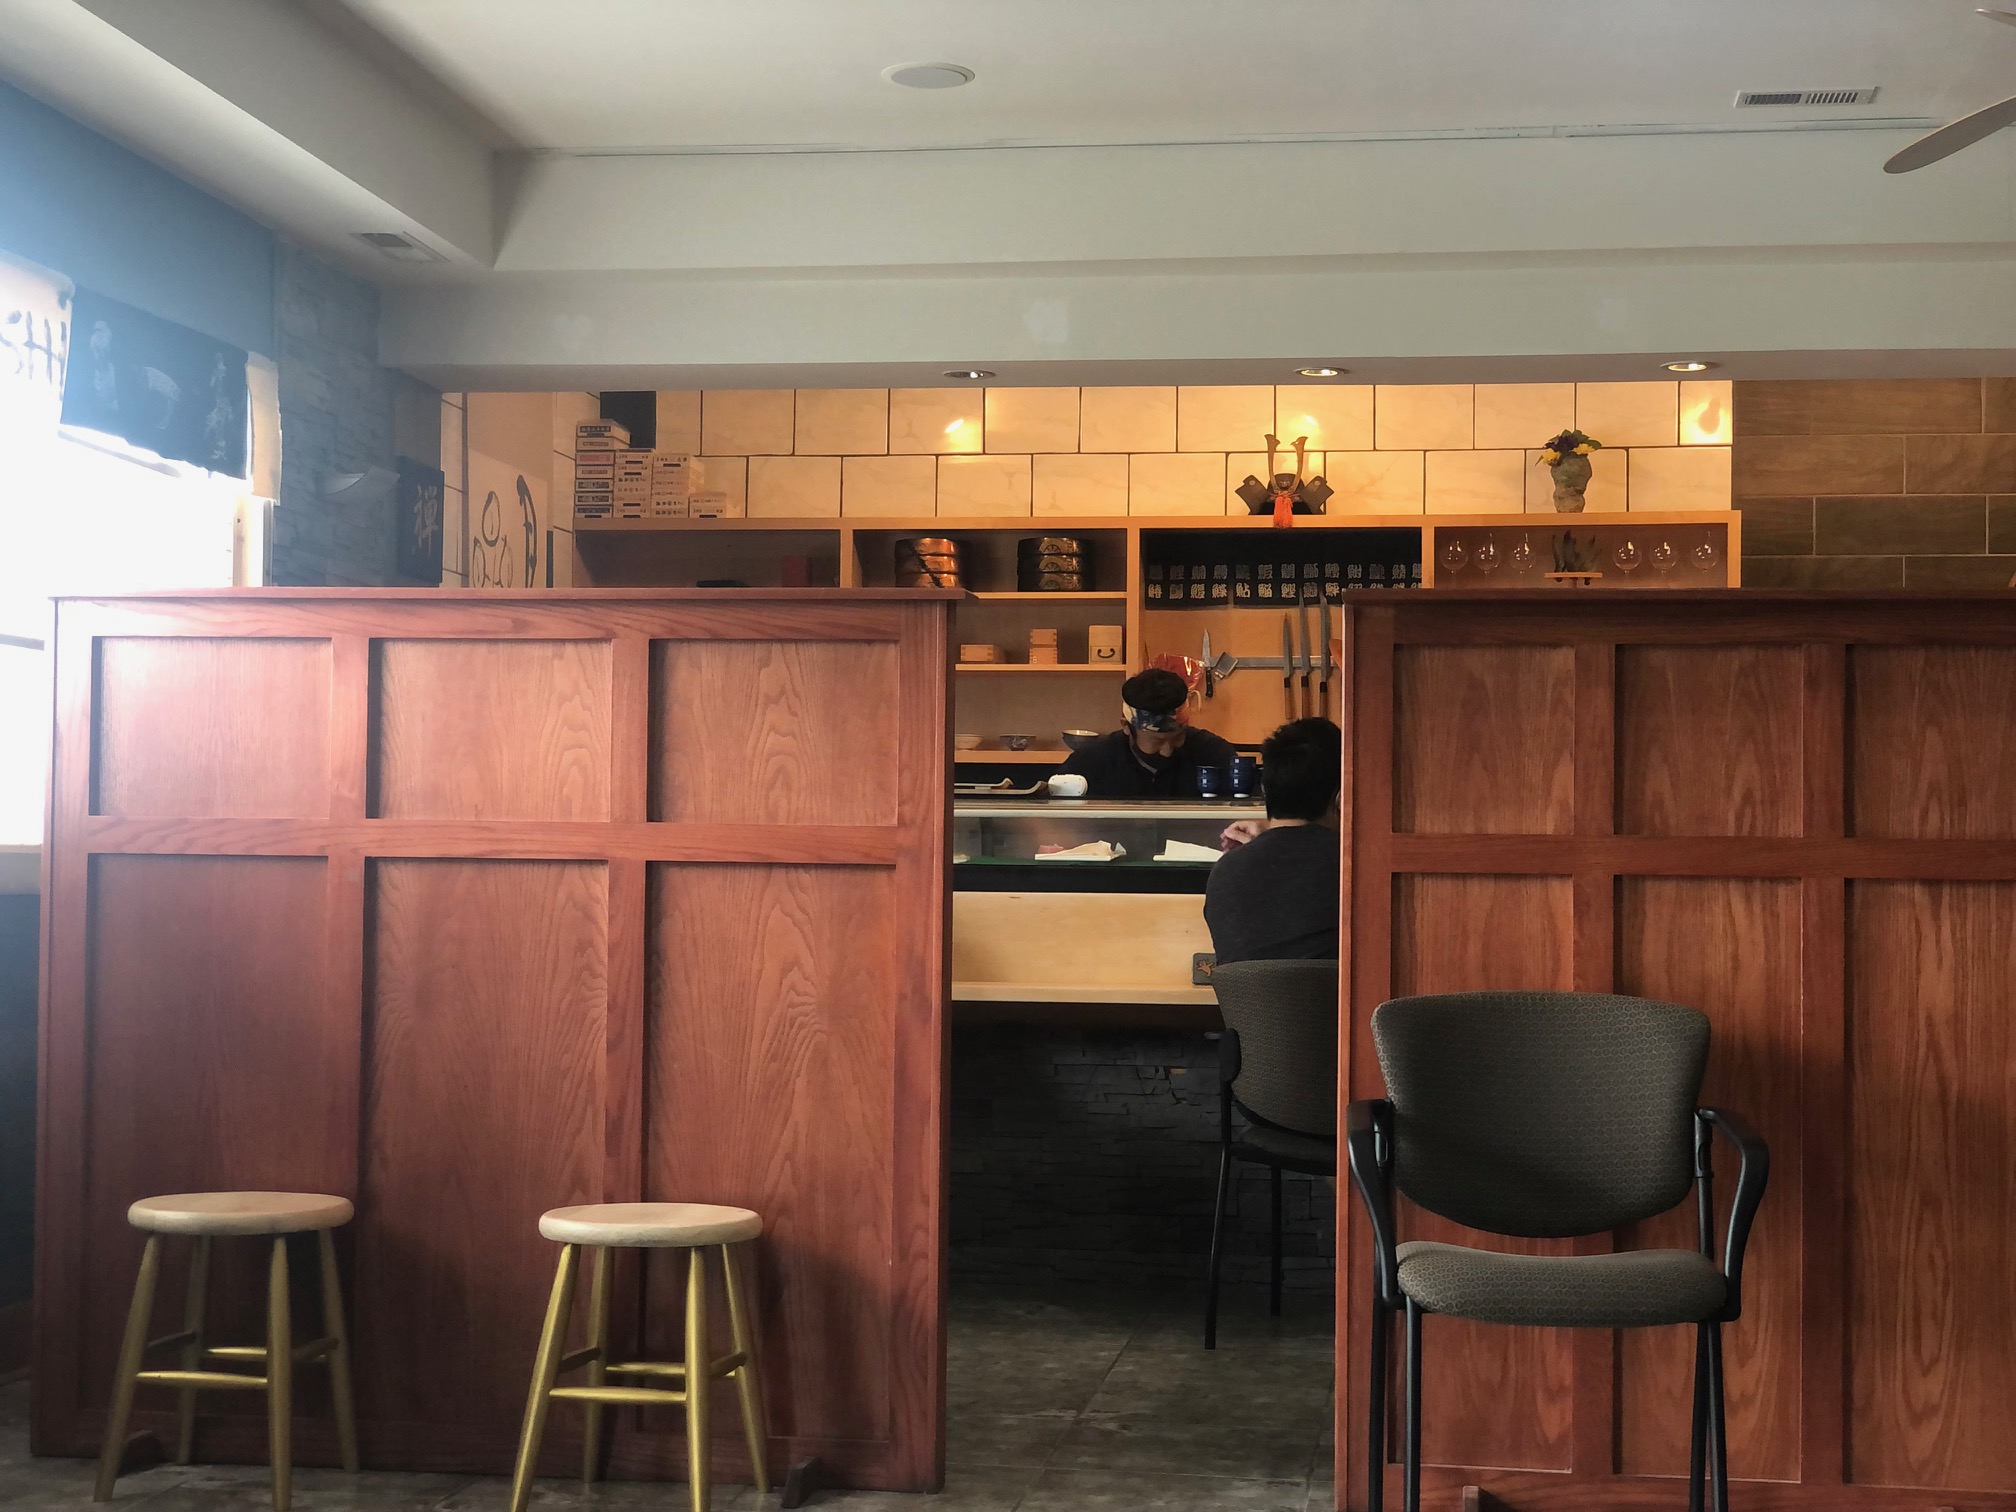 Inside ISHI, there is a sushi bar beyond wooden dividers. The front room has two wooden stools and a black office chair with no one sitting in them. Photo by Alyssa Buckley.